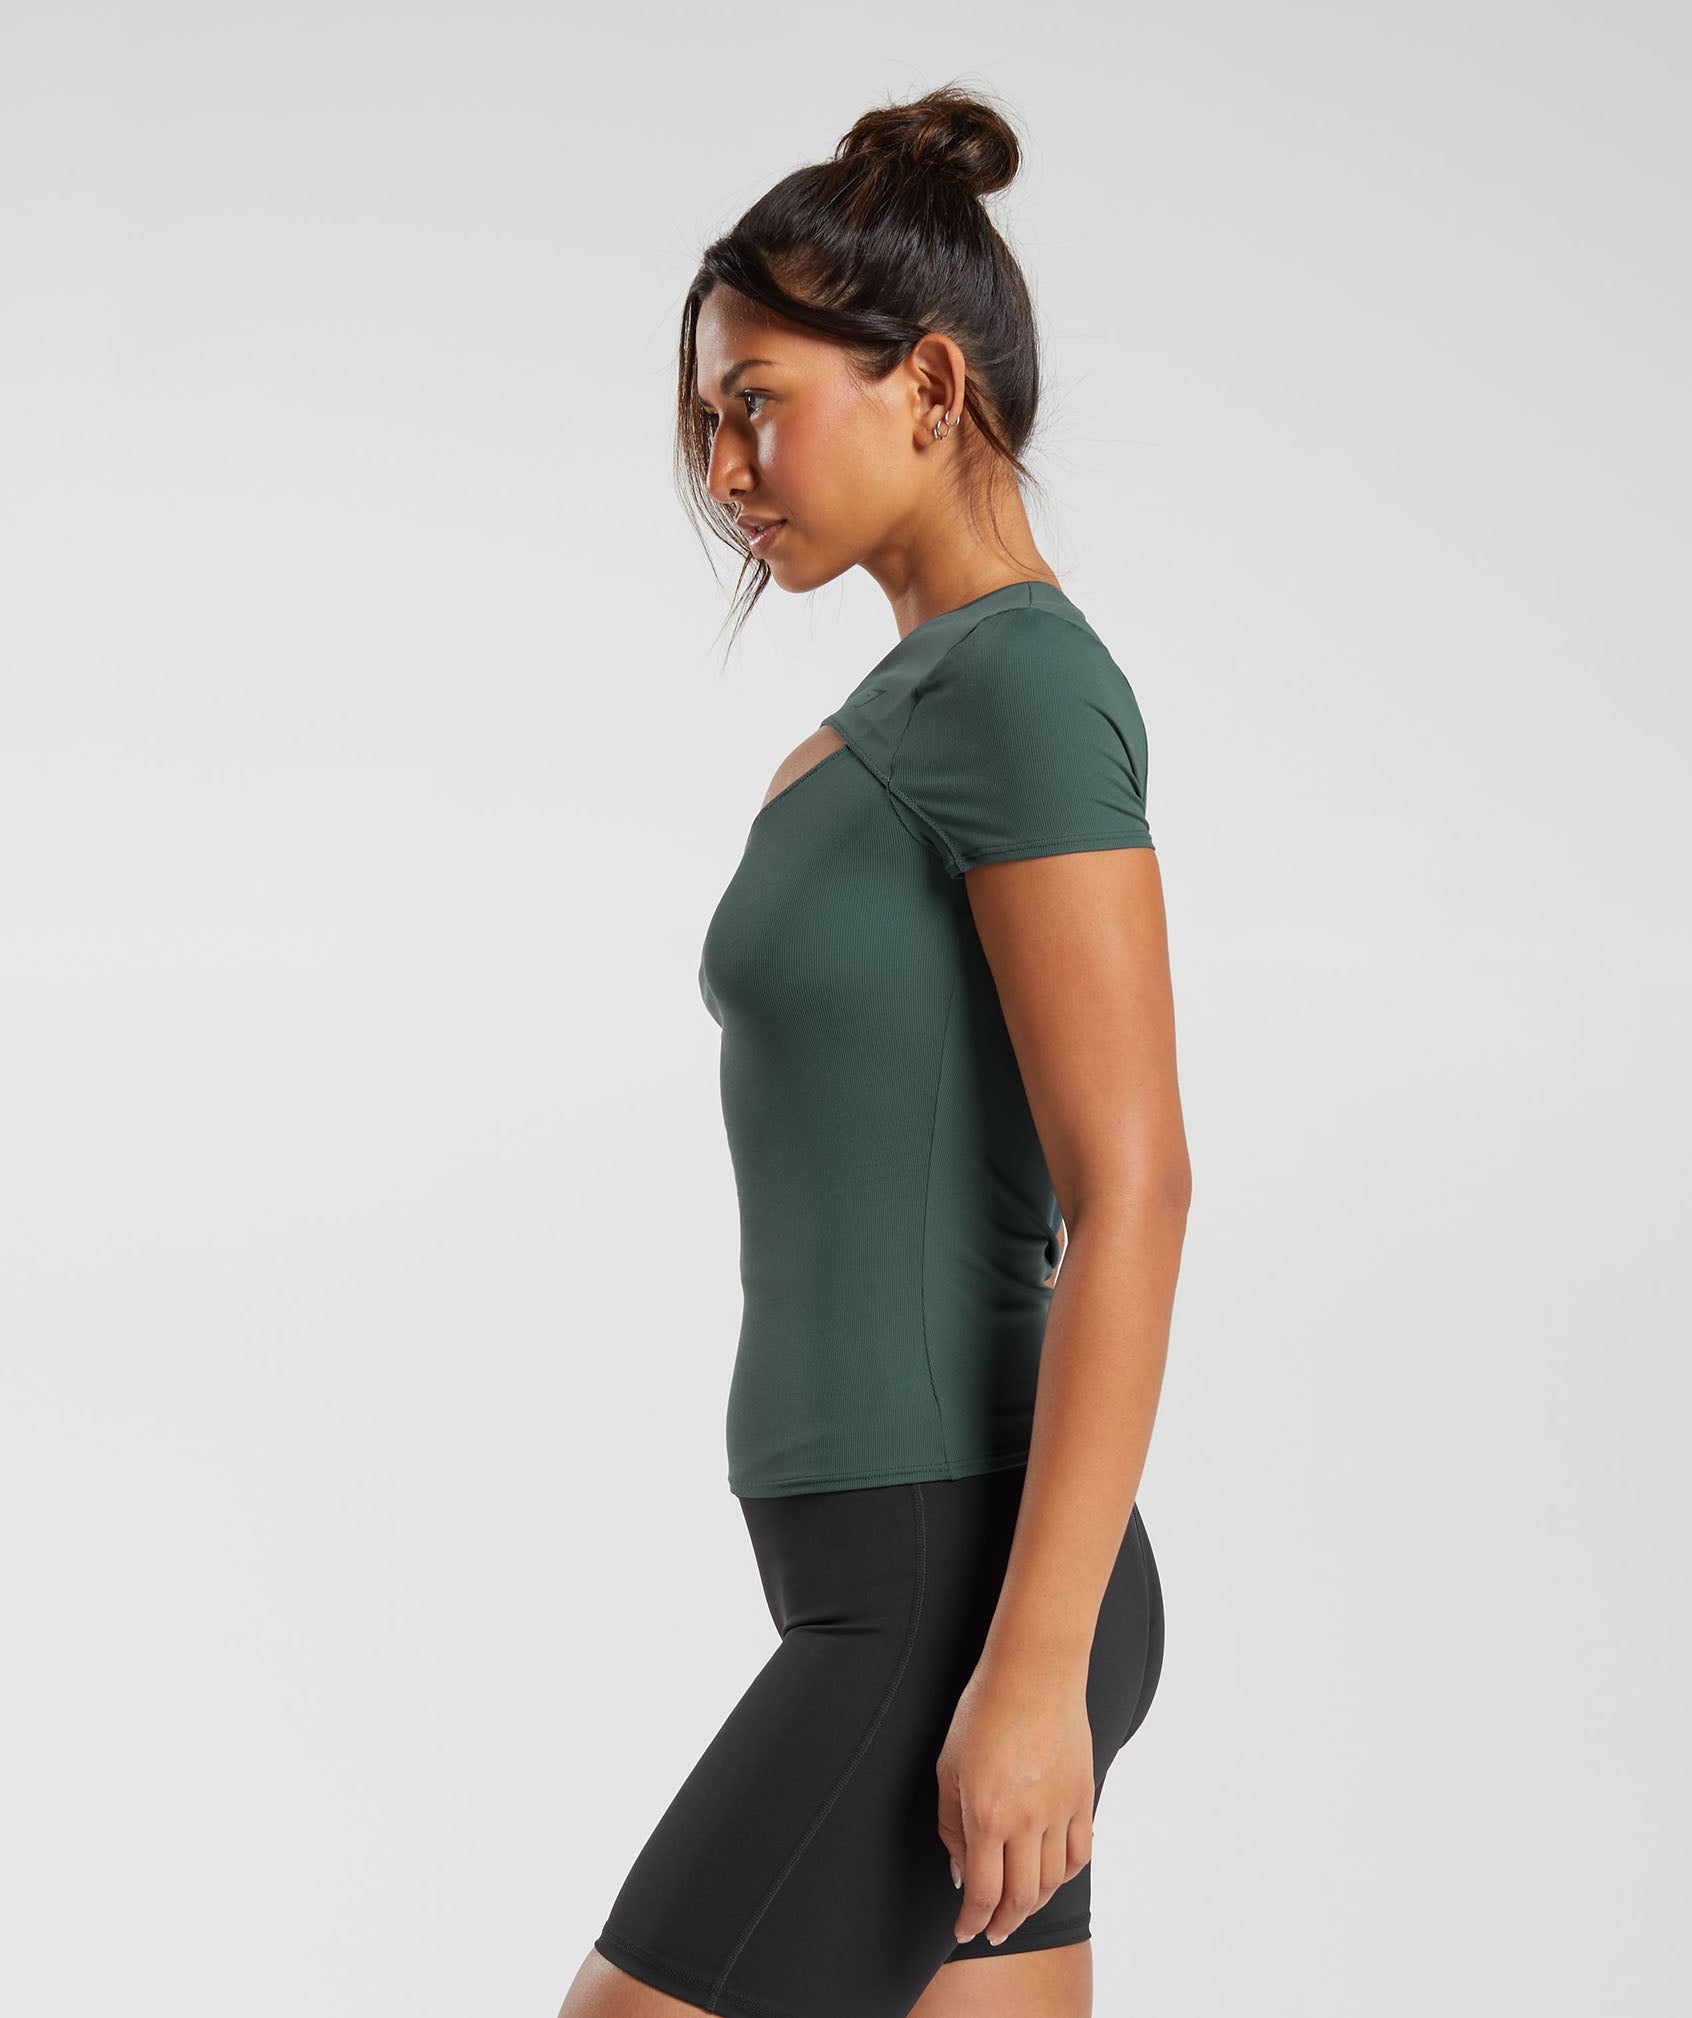 Elevate Top in Fog Green - view 3